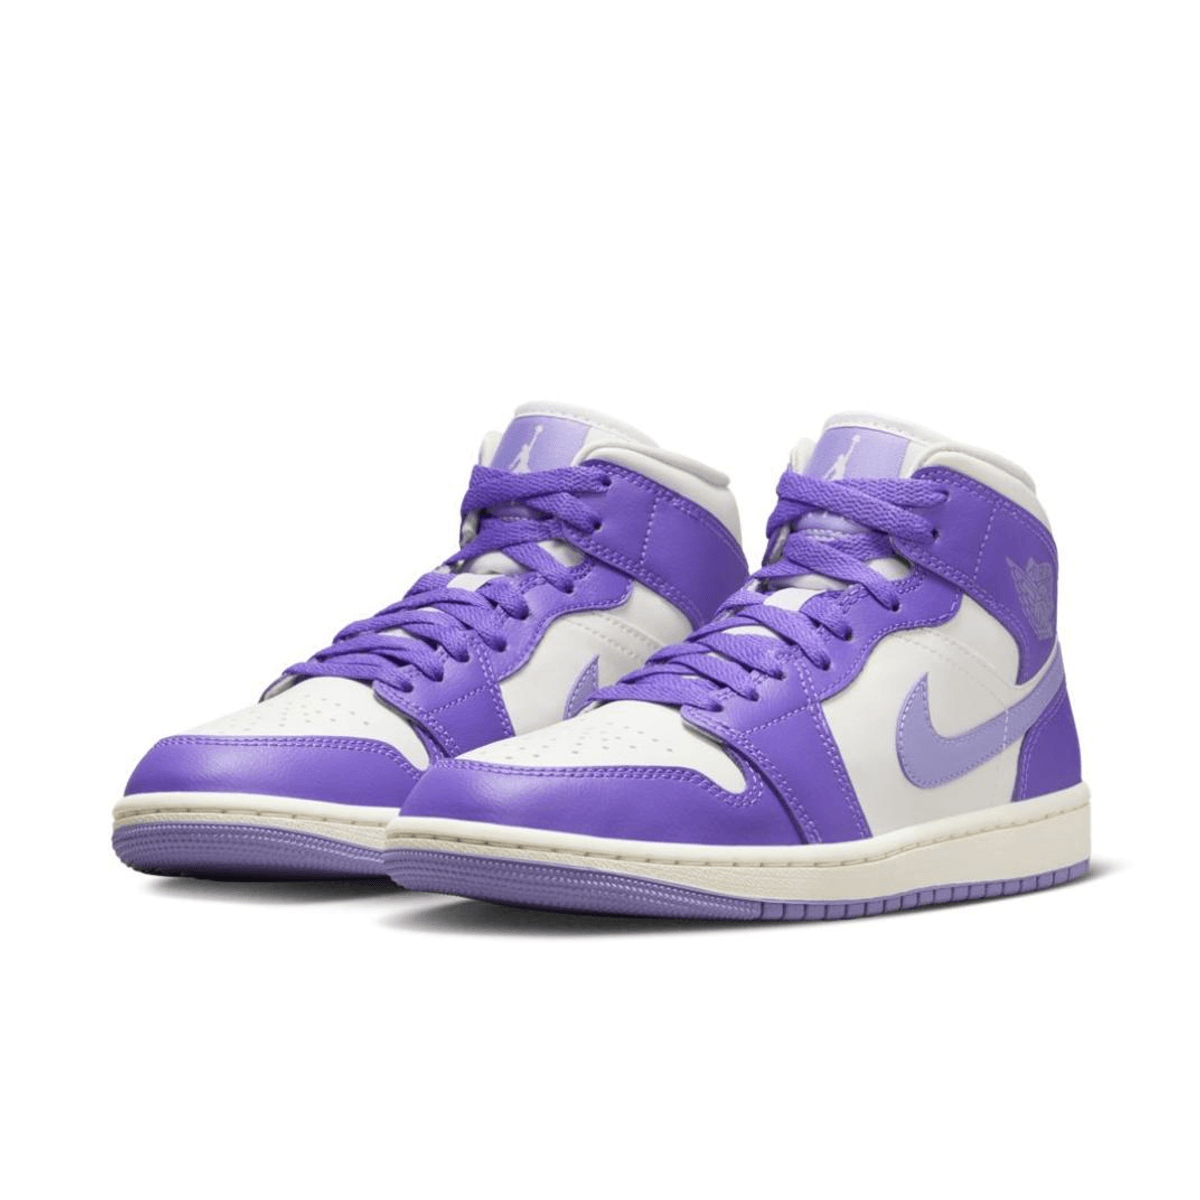 The Air Jordan 1 Mid Action Grape Is A Vibrant Delight